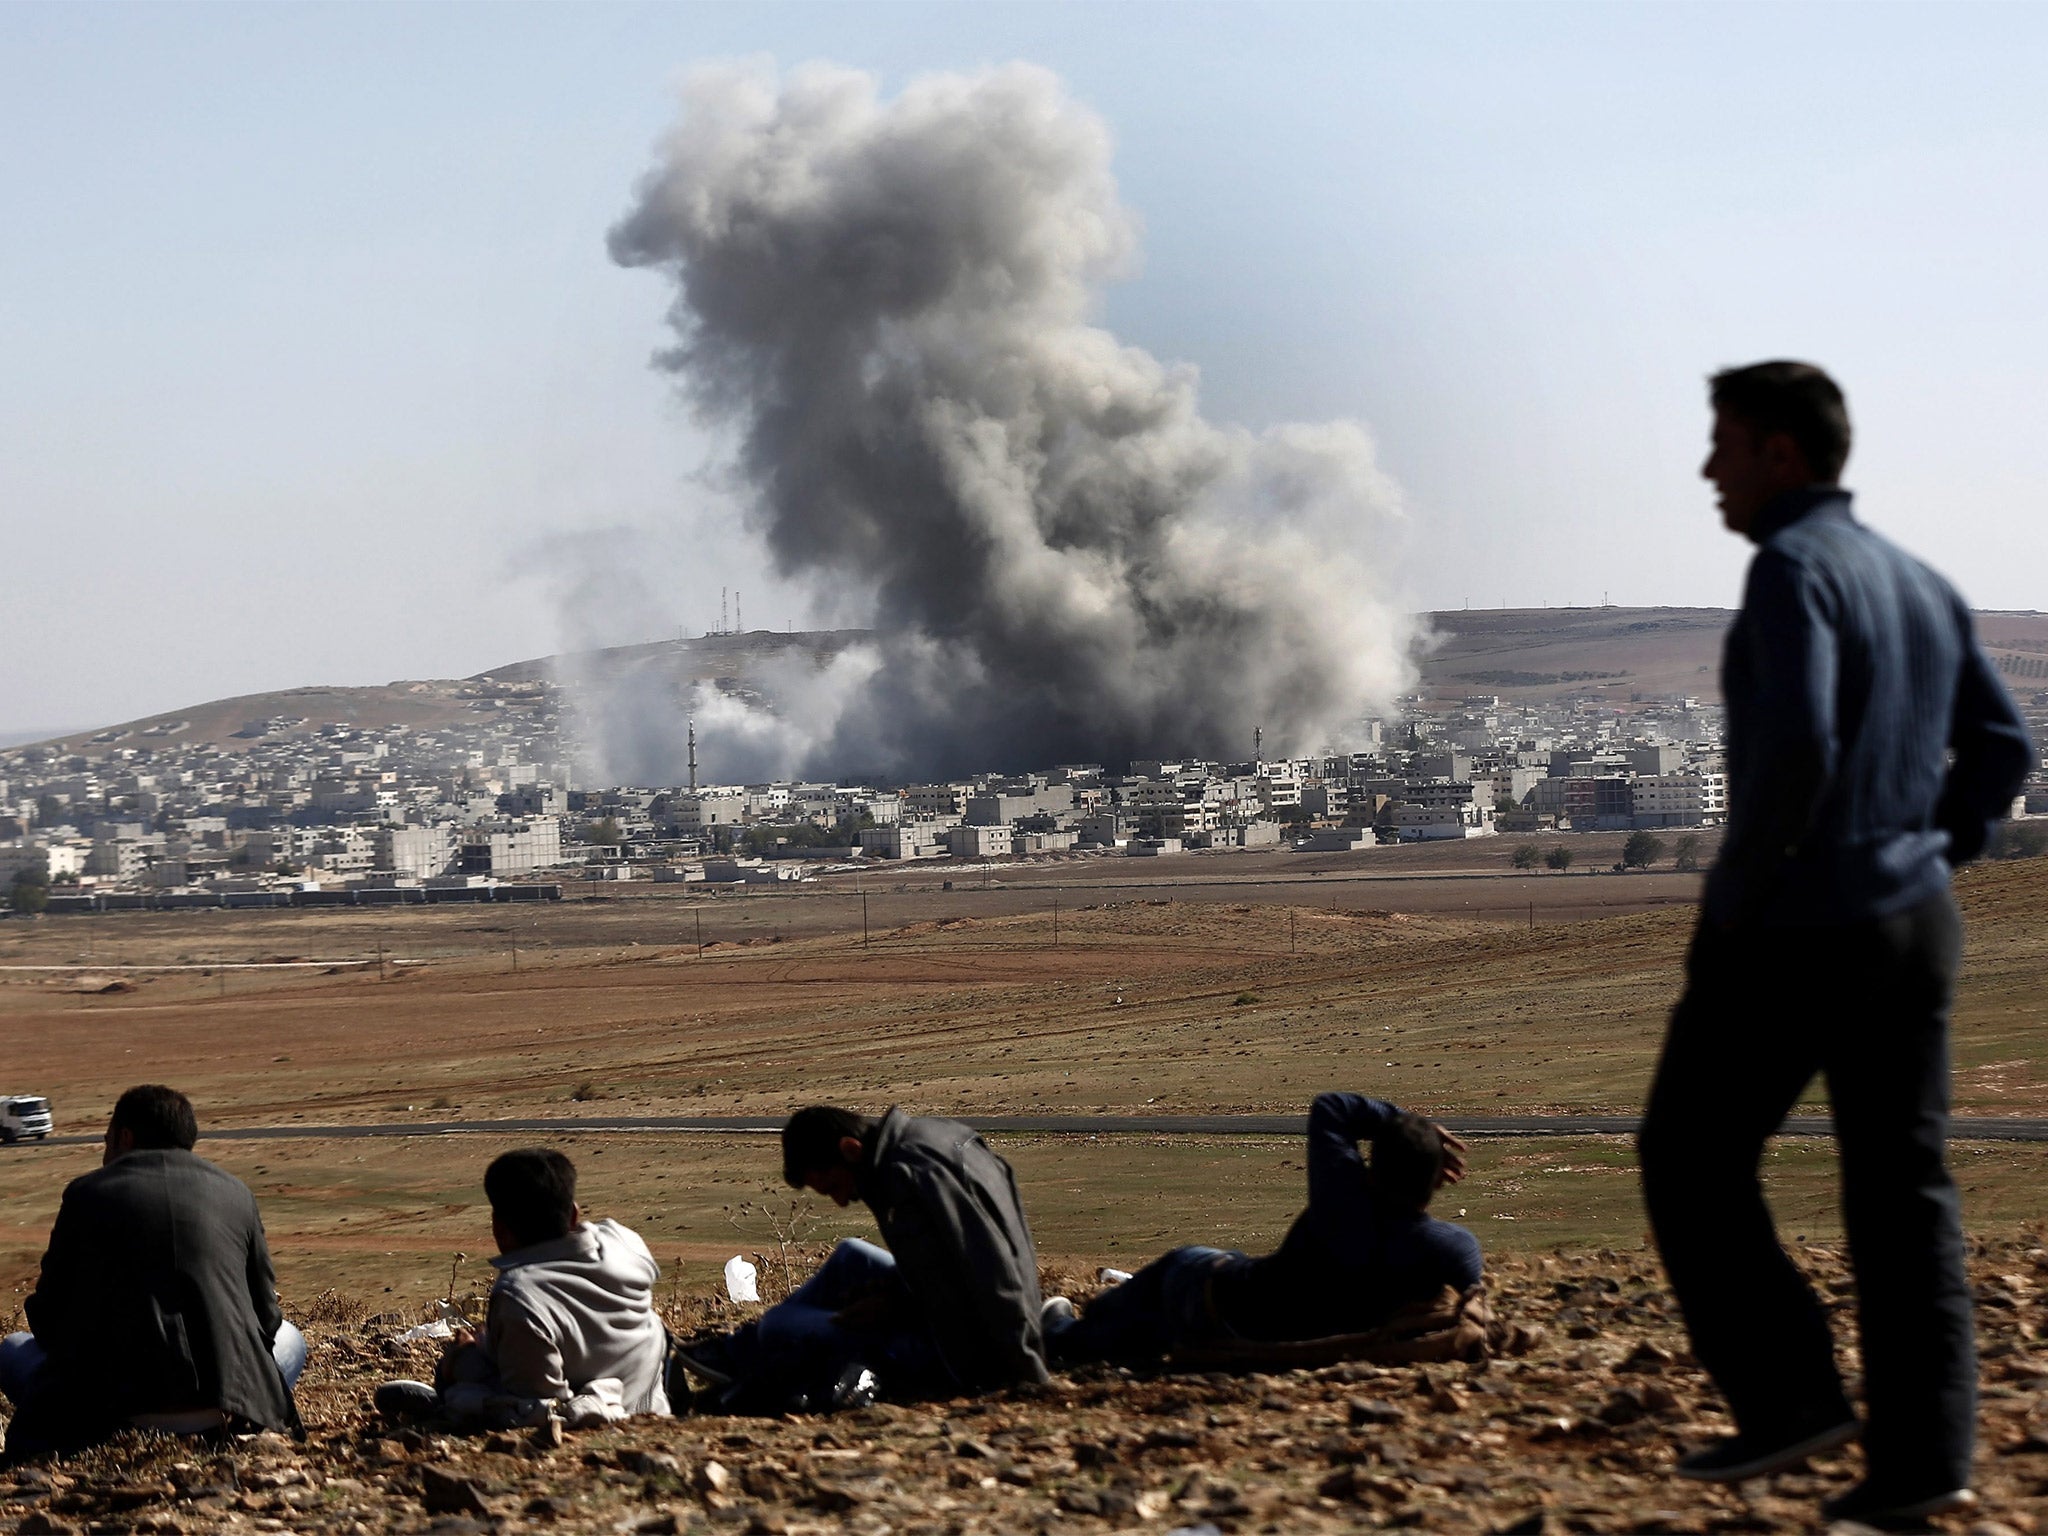 People watch an explosion after an apparent US-led coalition air strike on Kobani, Syria